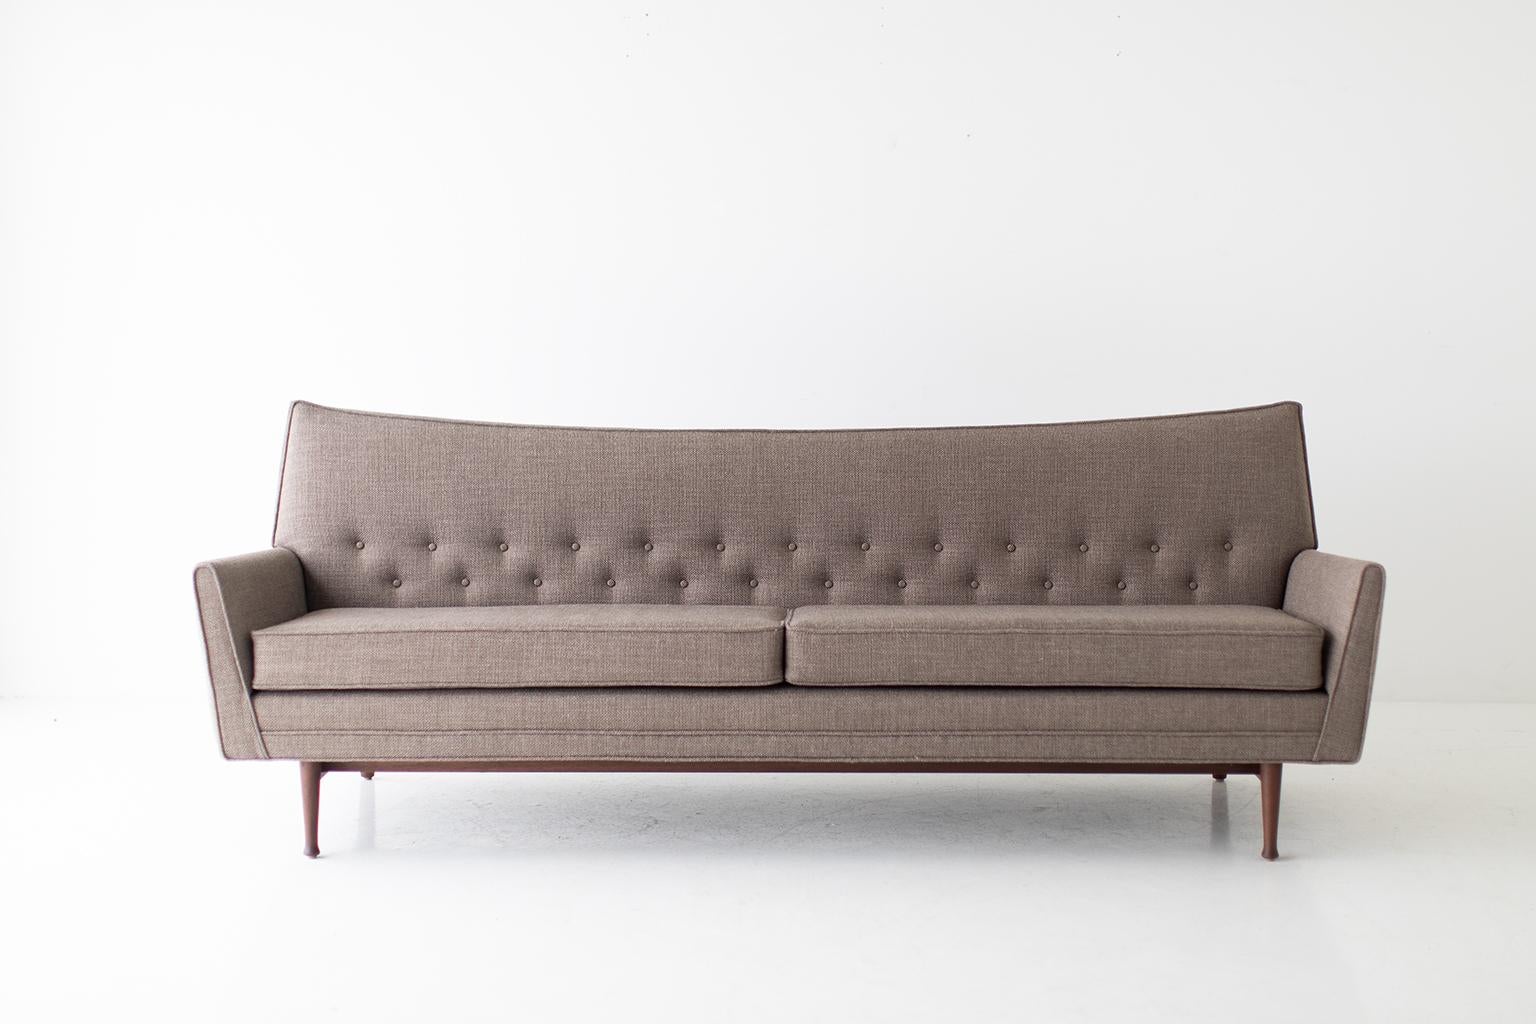 Modern sofa, Matador modern sofa, lawrence peabody, walnut

This Lawrence Peabody modern sofa for Craft Associates Furniture is expertly handcrafted and upholstered. This Peabody sofa is a licensed reintroduction for Craft Associates. The sofa is